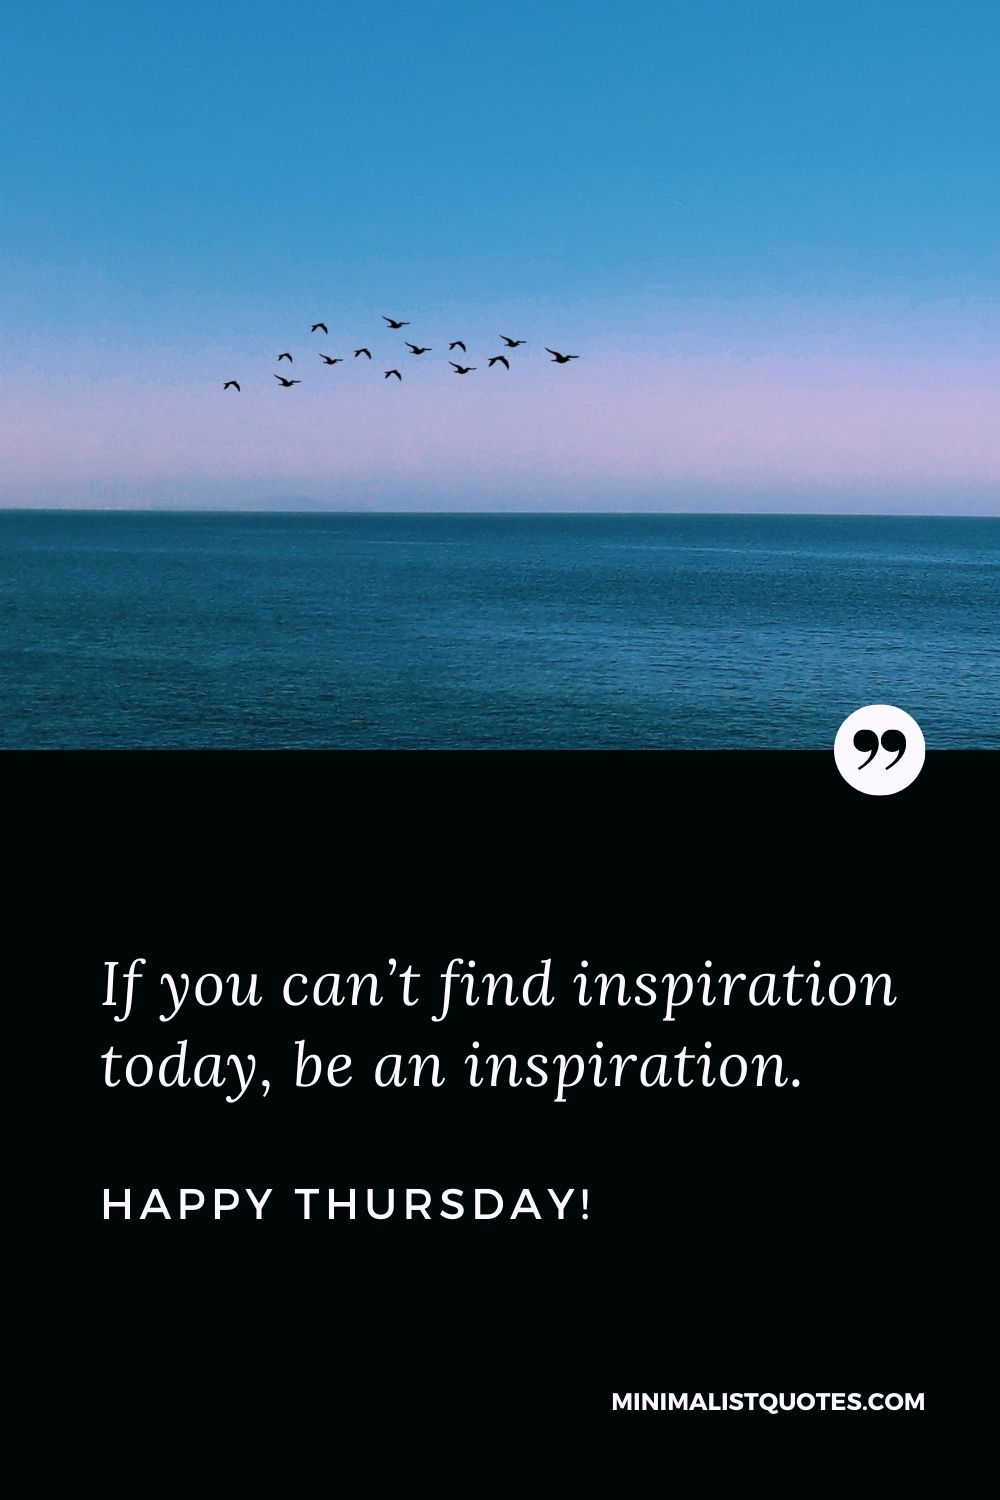 Thursday inspirational quotes: If you can’t find inspiration today, be an inspiration. Happy Thursday!